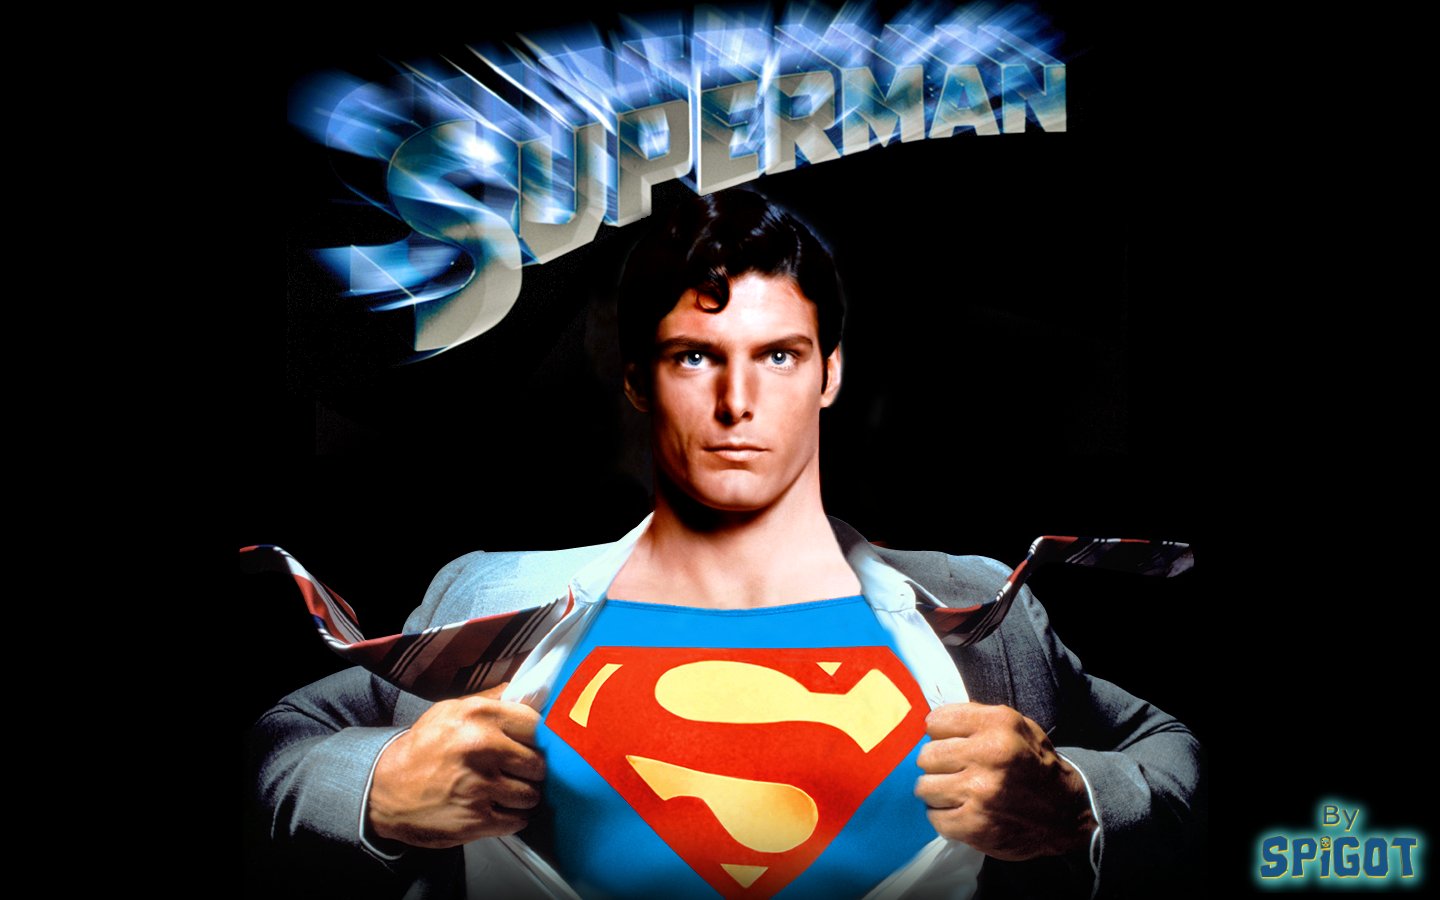 Christopher Reeve George Spigots For